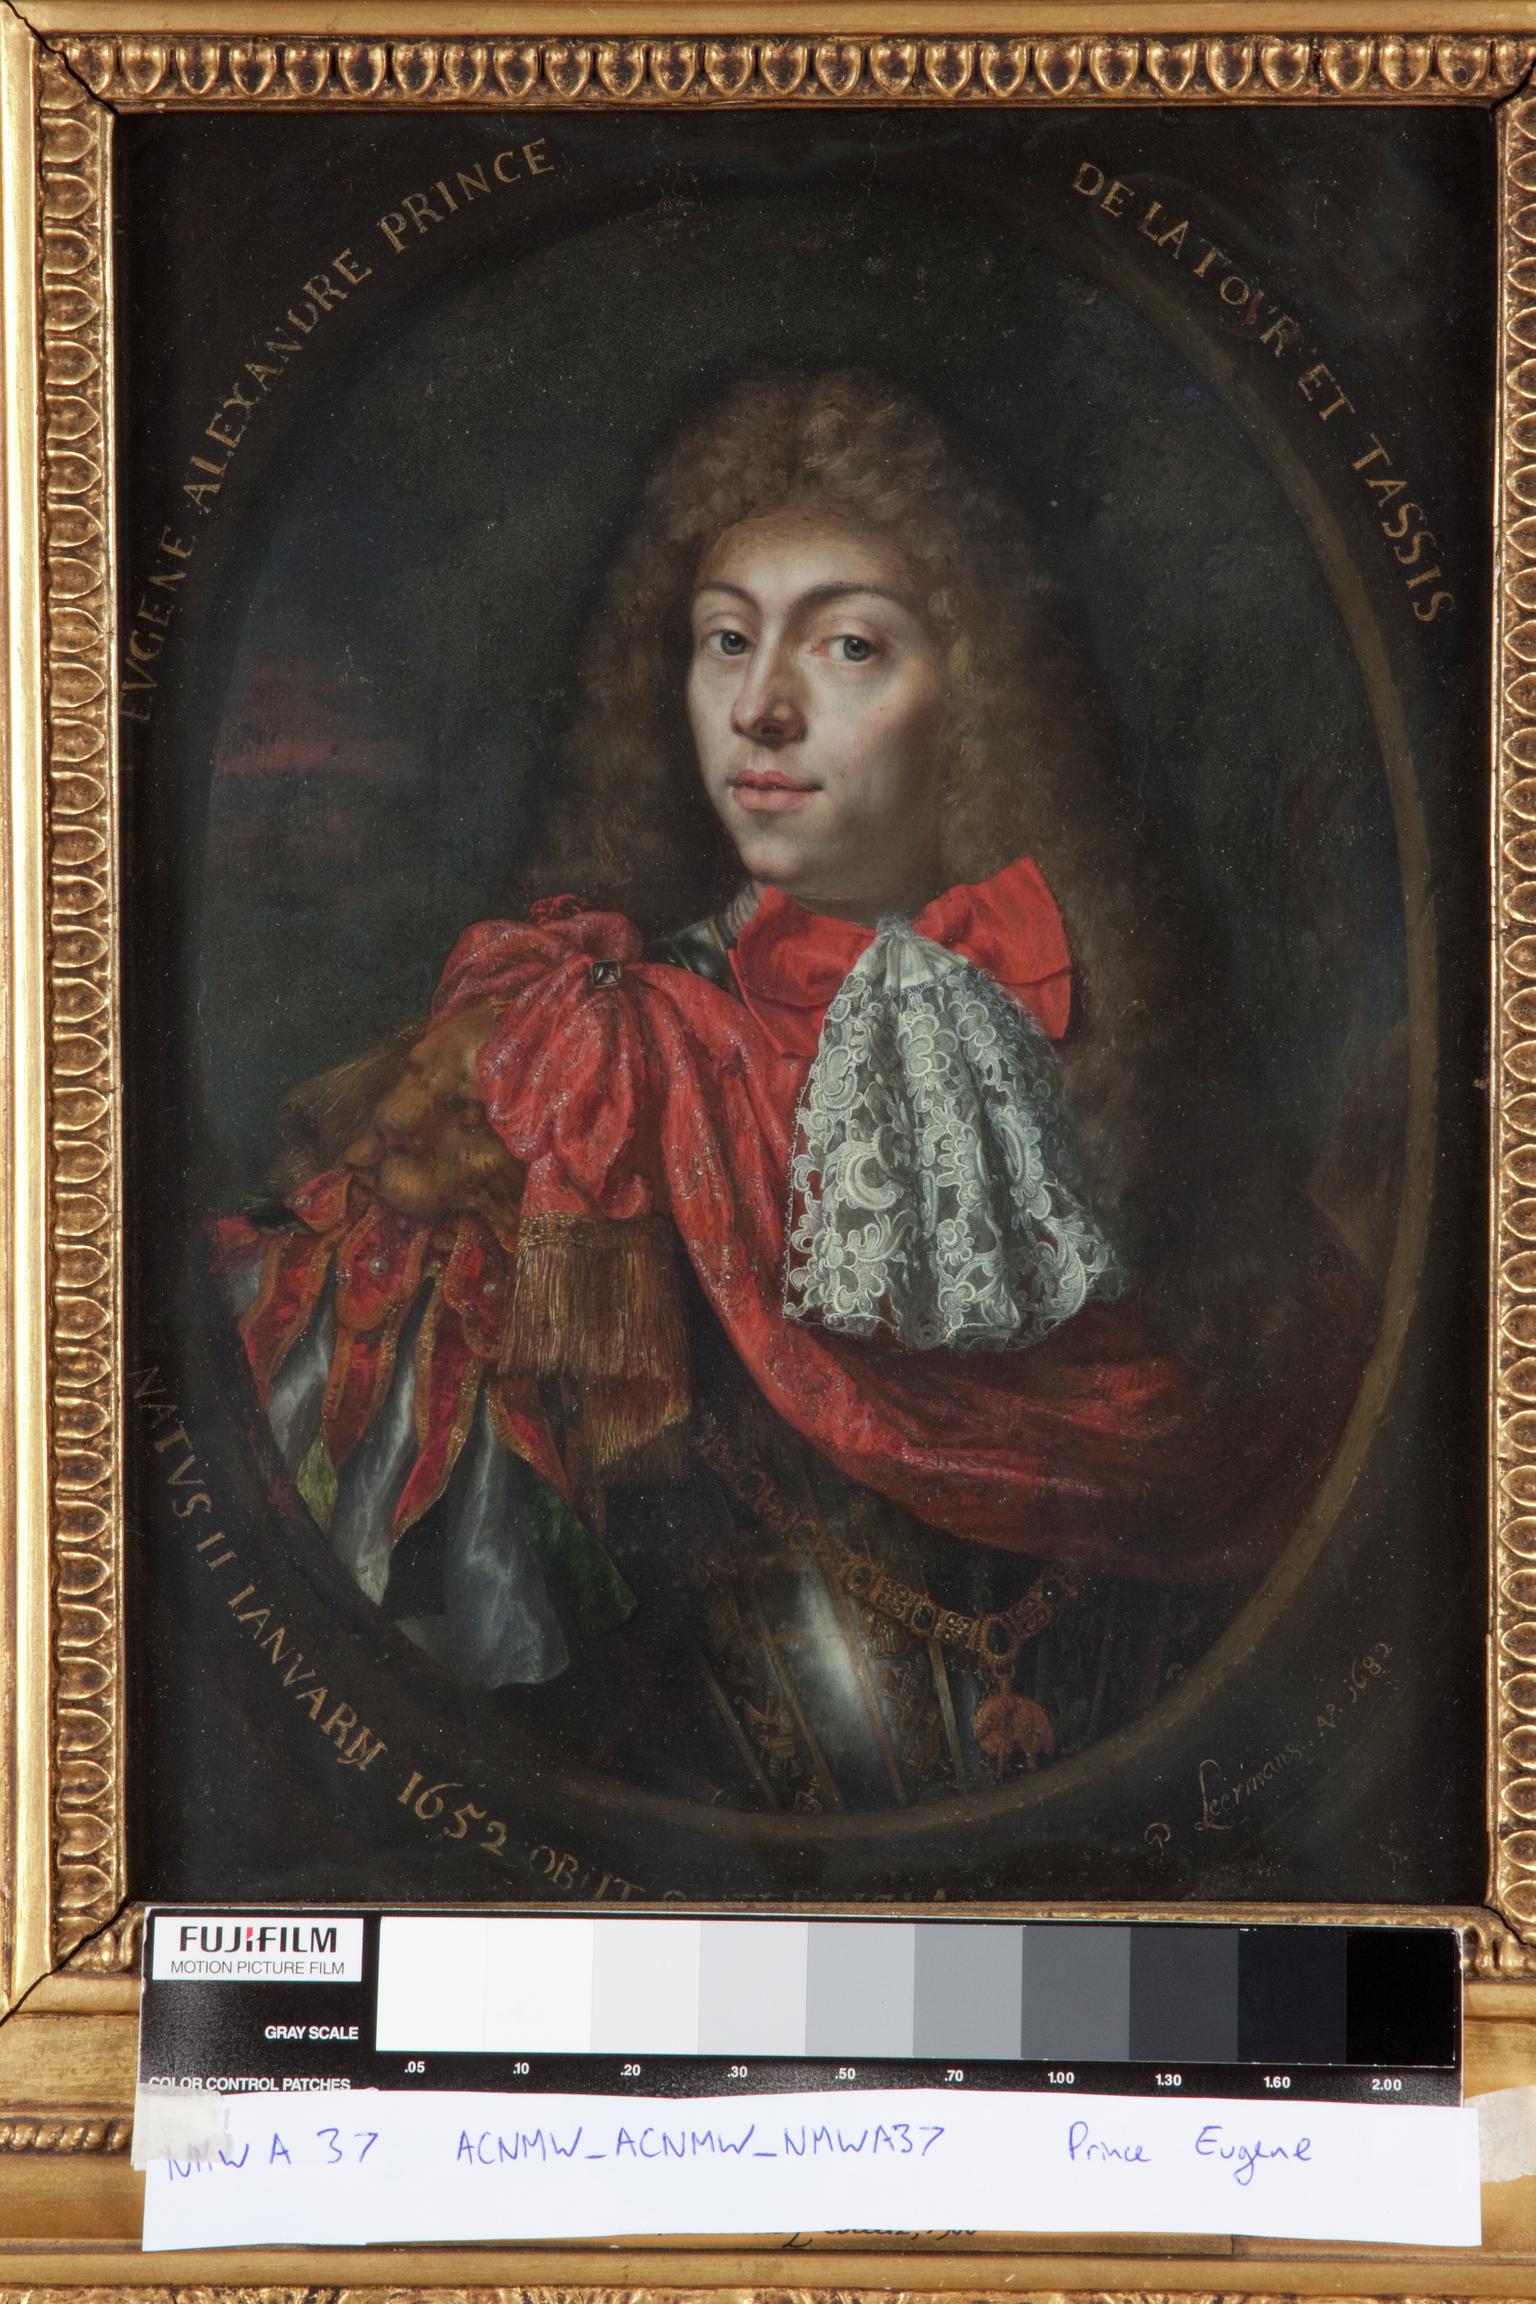 Prince Eugene Alexander of Thurn and Taxis (1652-1714)